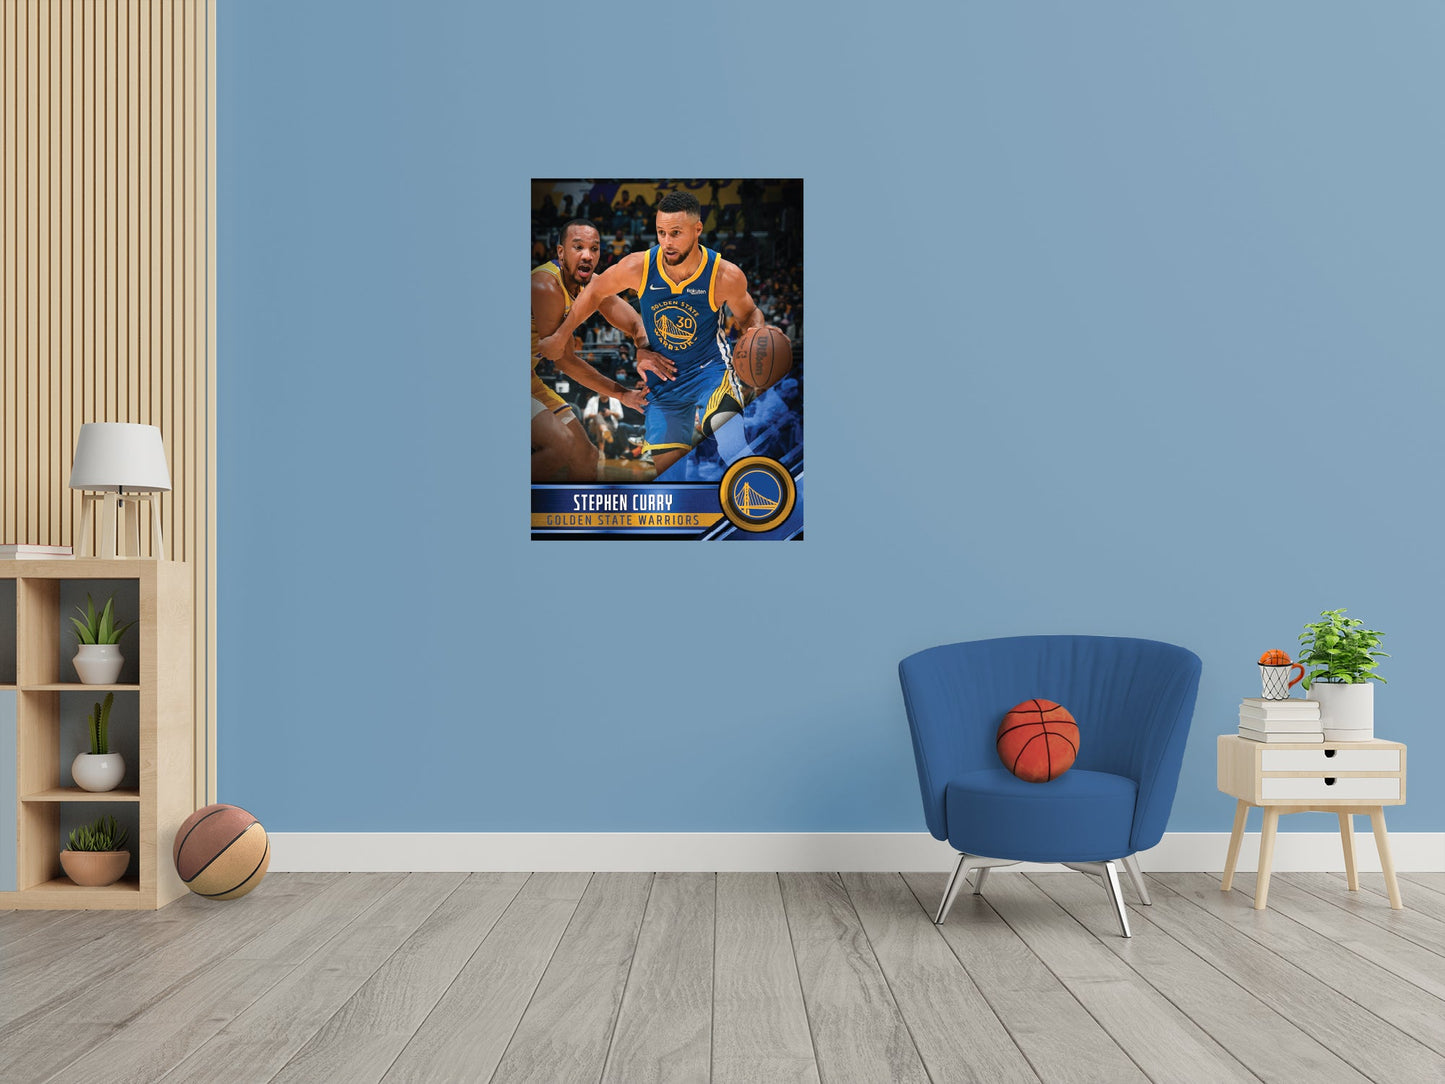 Golden State Warriors: Stephen Curry Poster - Officially Licensed NBA Removable Adhesive Decal